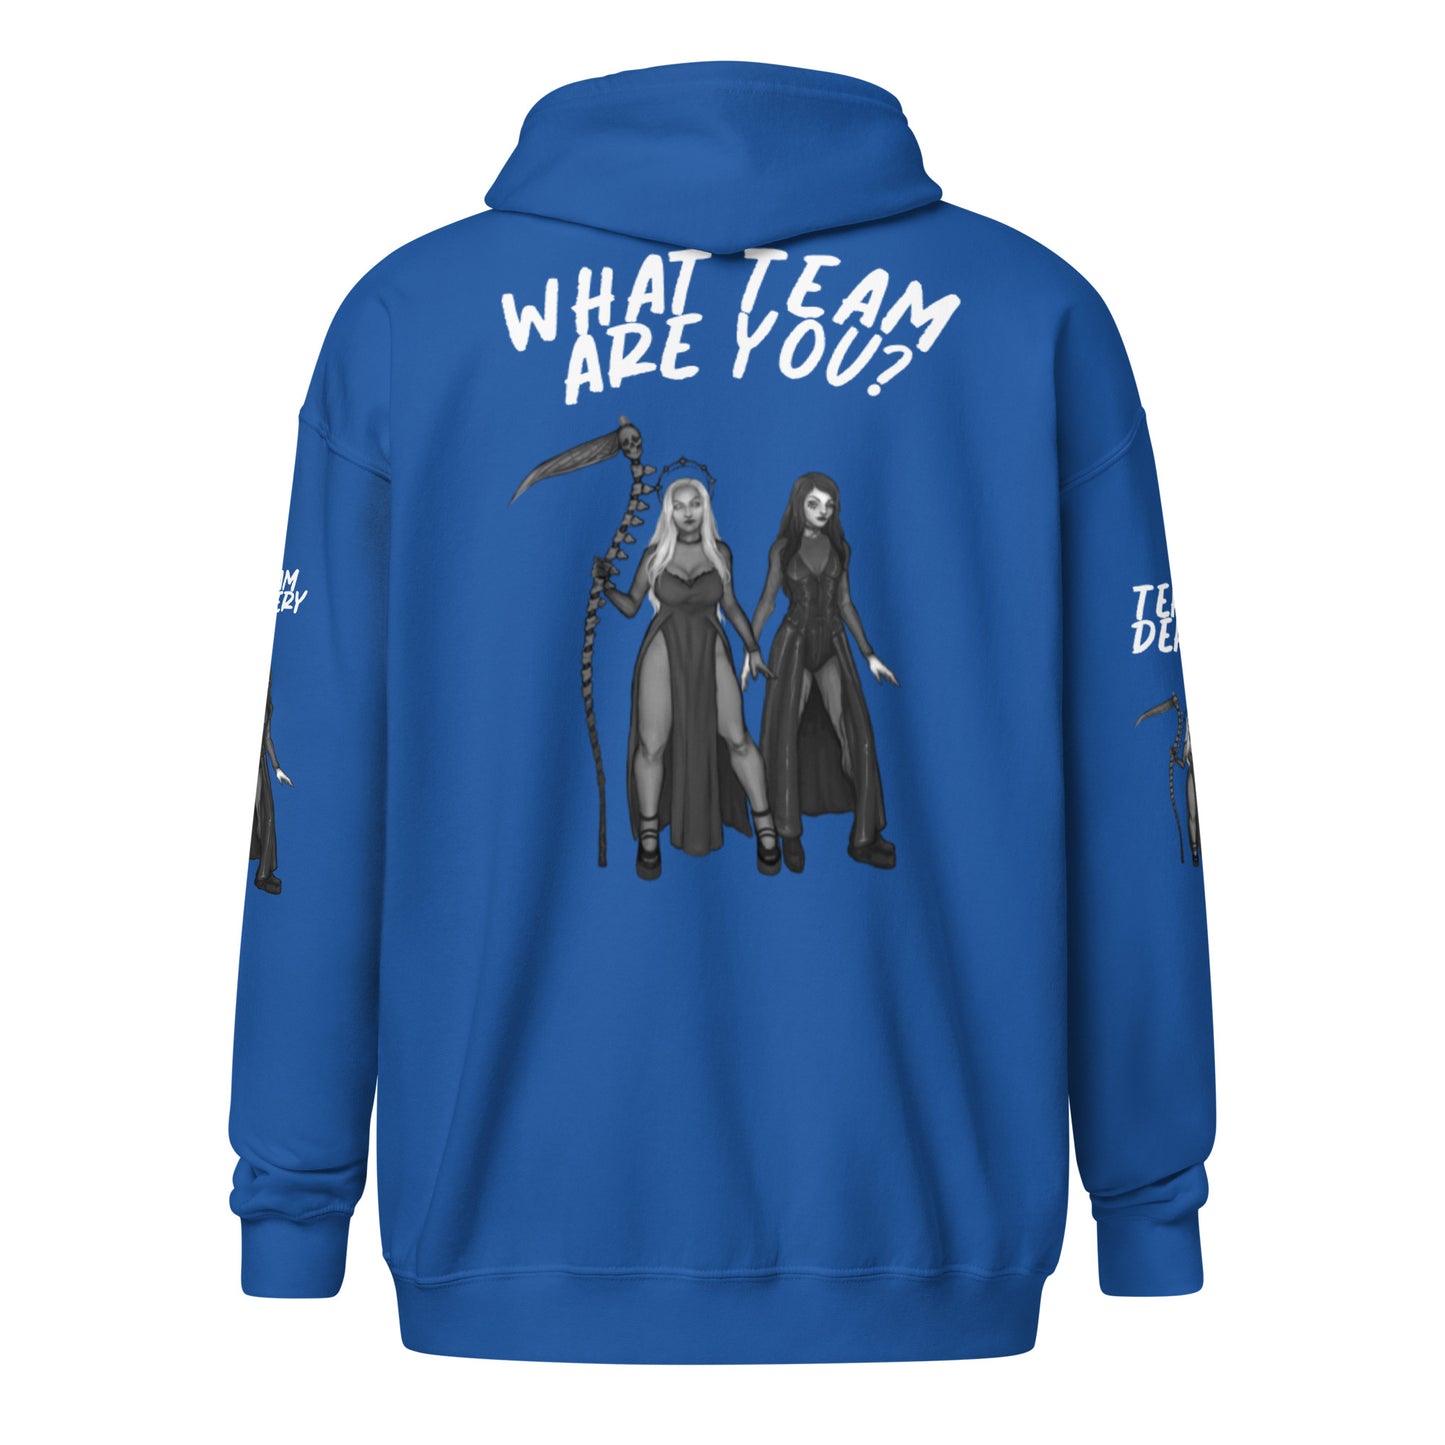 Which Team Are You? Unisex heavy blend zip hoodie